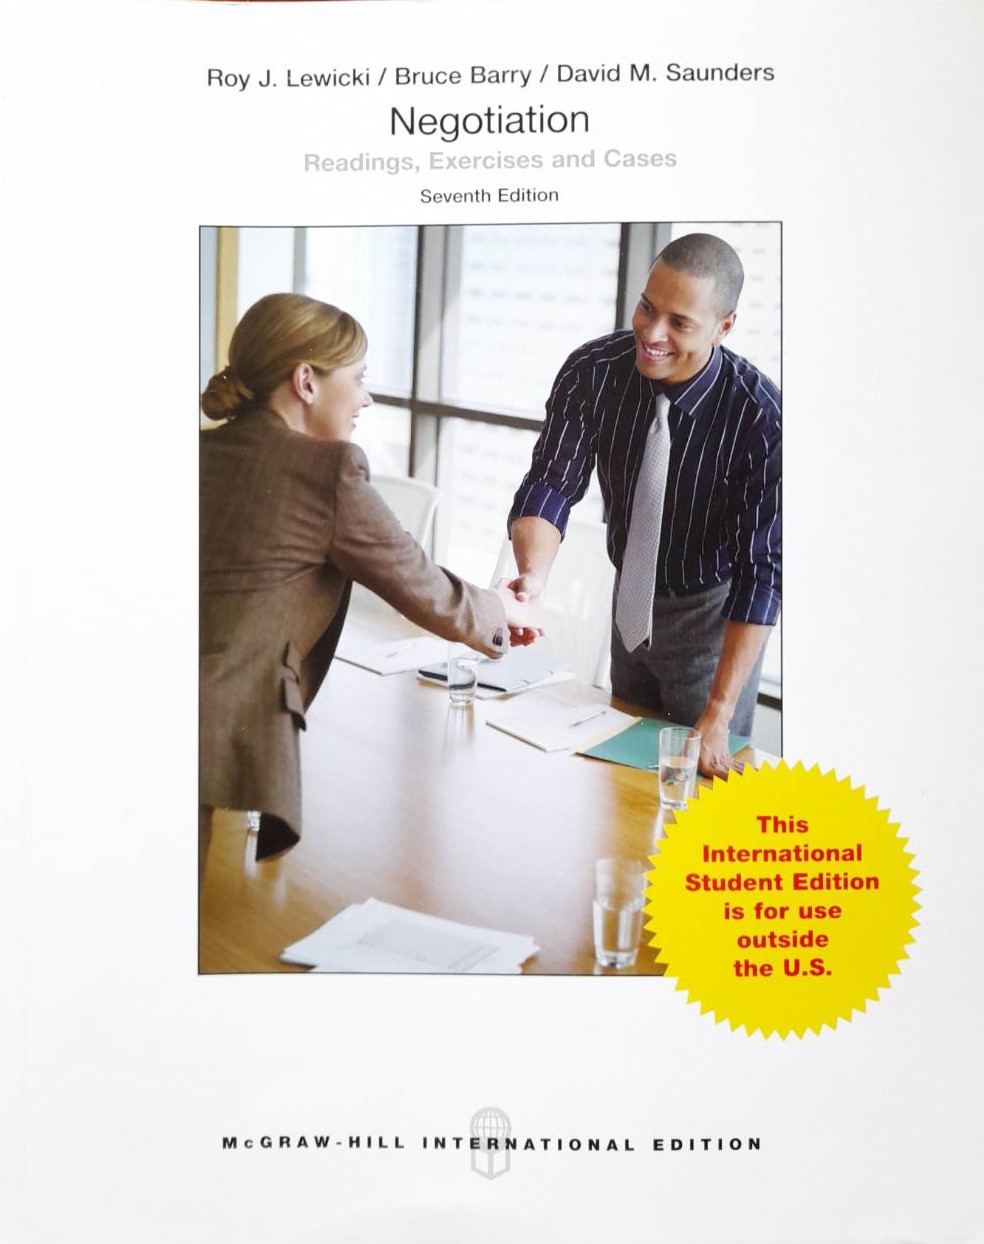 Negotiation: Readings, Exercises, and Cases 7th Edition by Roy J. Lewicki, Bruce Barry, David M. Saunders รูปที่ 1